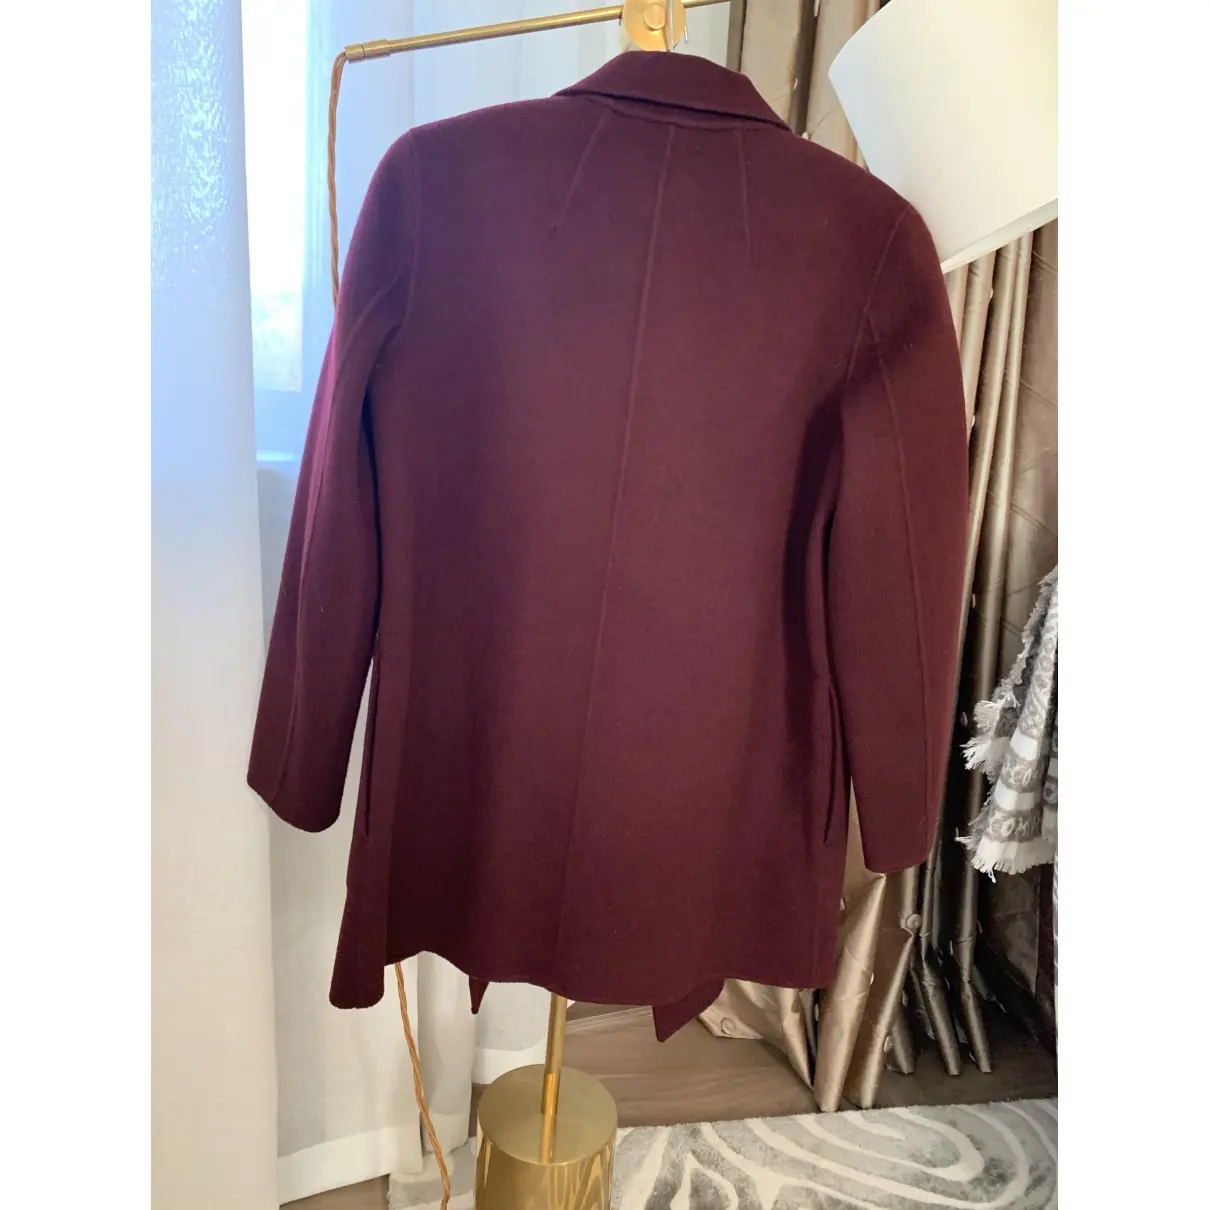 Buy Theory Cashmere jacket online